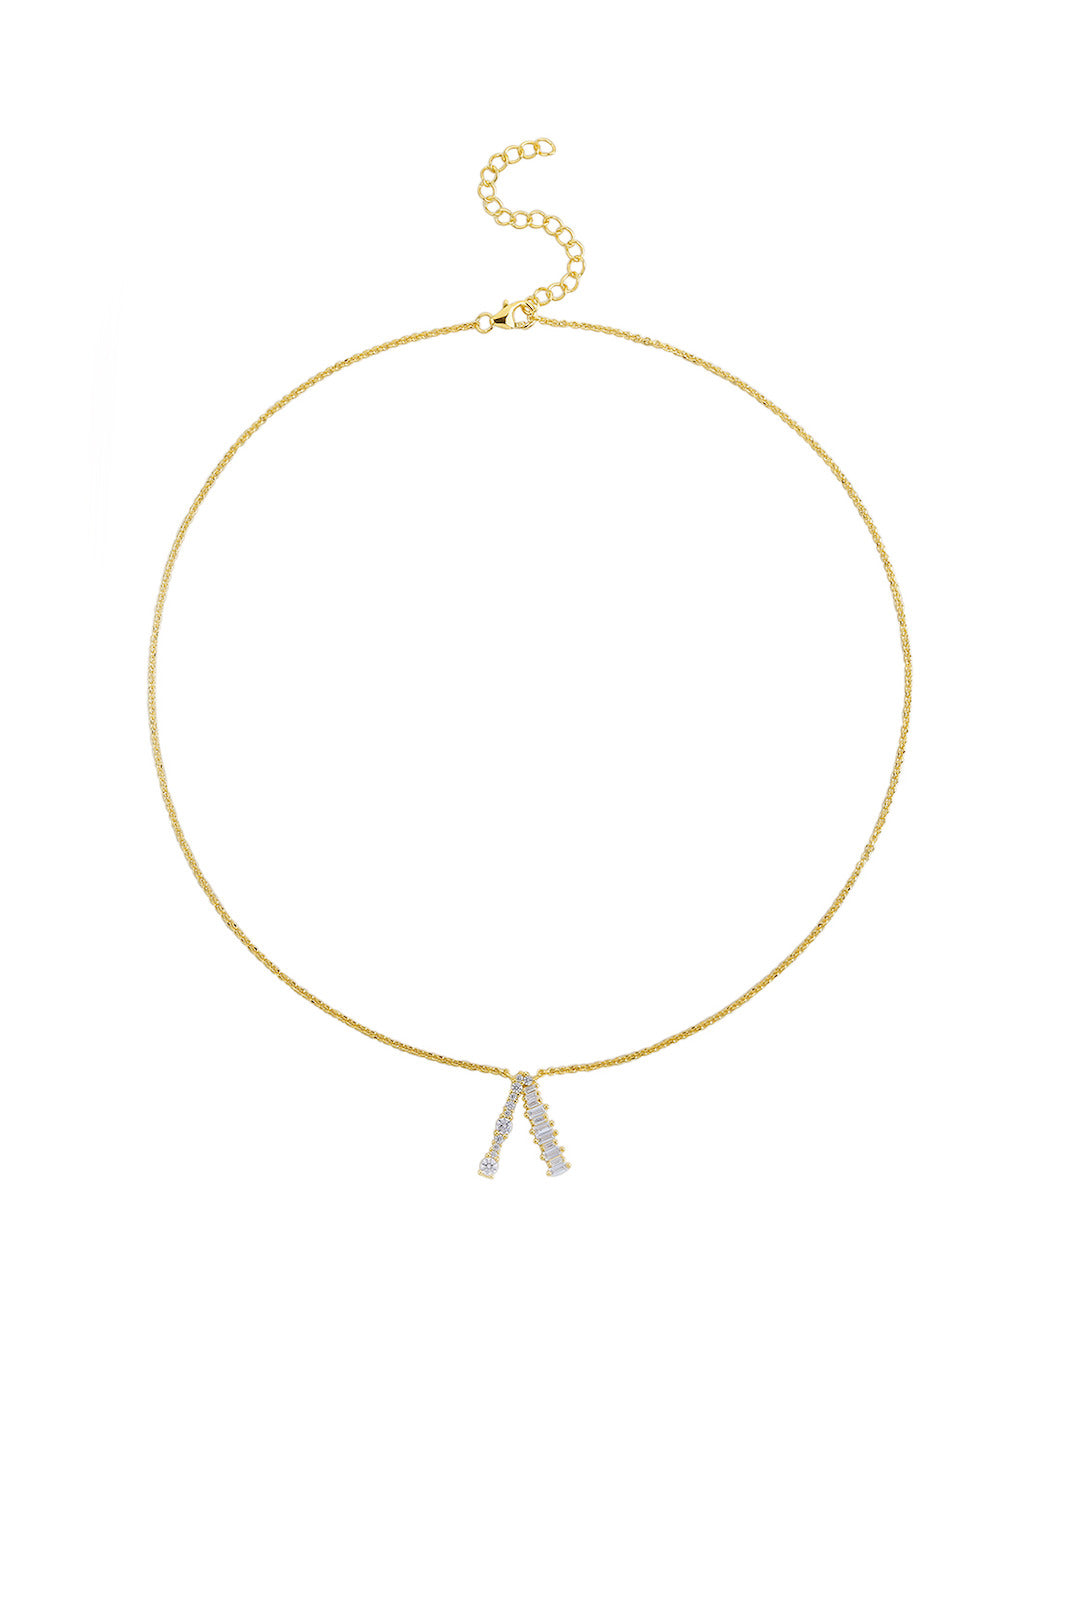 Gold Plated Sterling Silver Initial Necklace - Letter A Detail